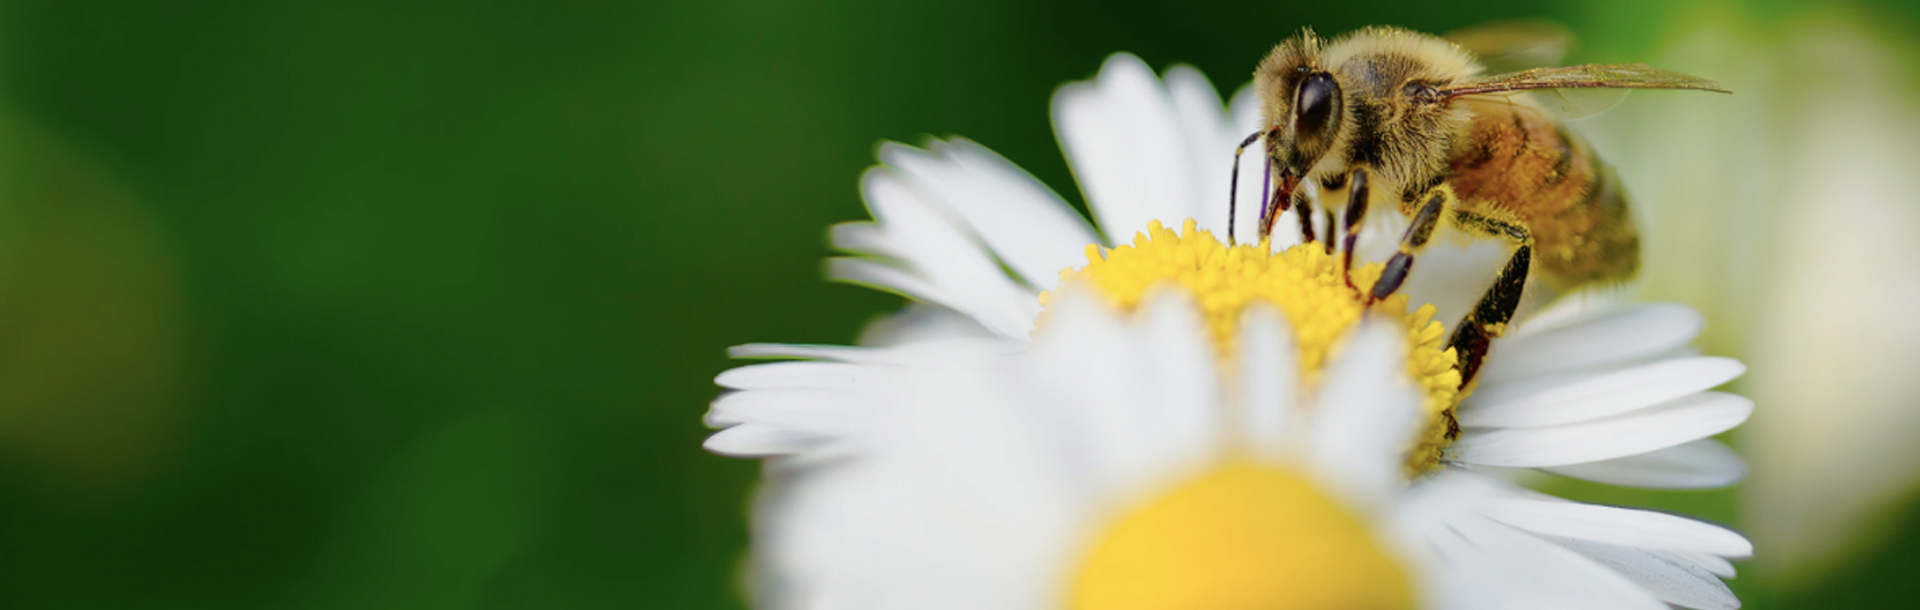 Public consultation on the draft EFSA Scientific Committee Opinion on a systems-based approach to the environmental risk assessment of multiple stressors in honey bees